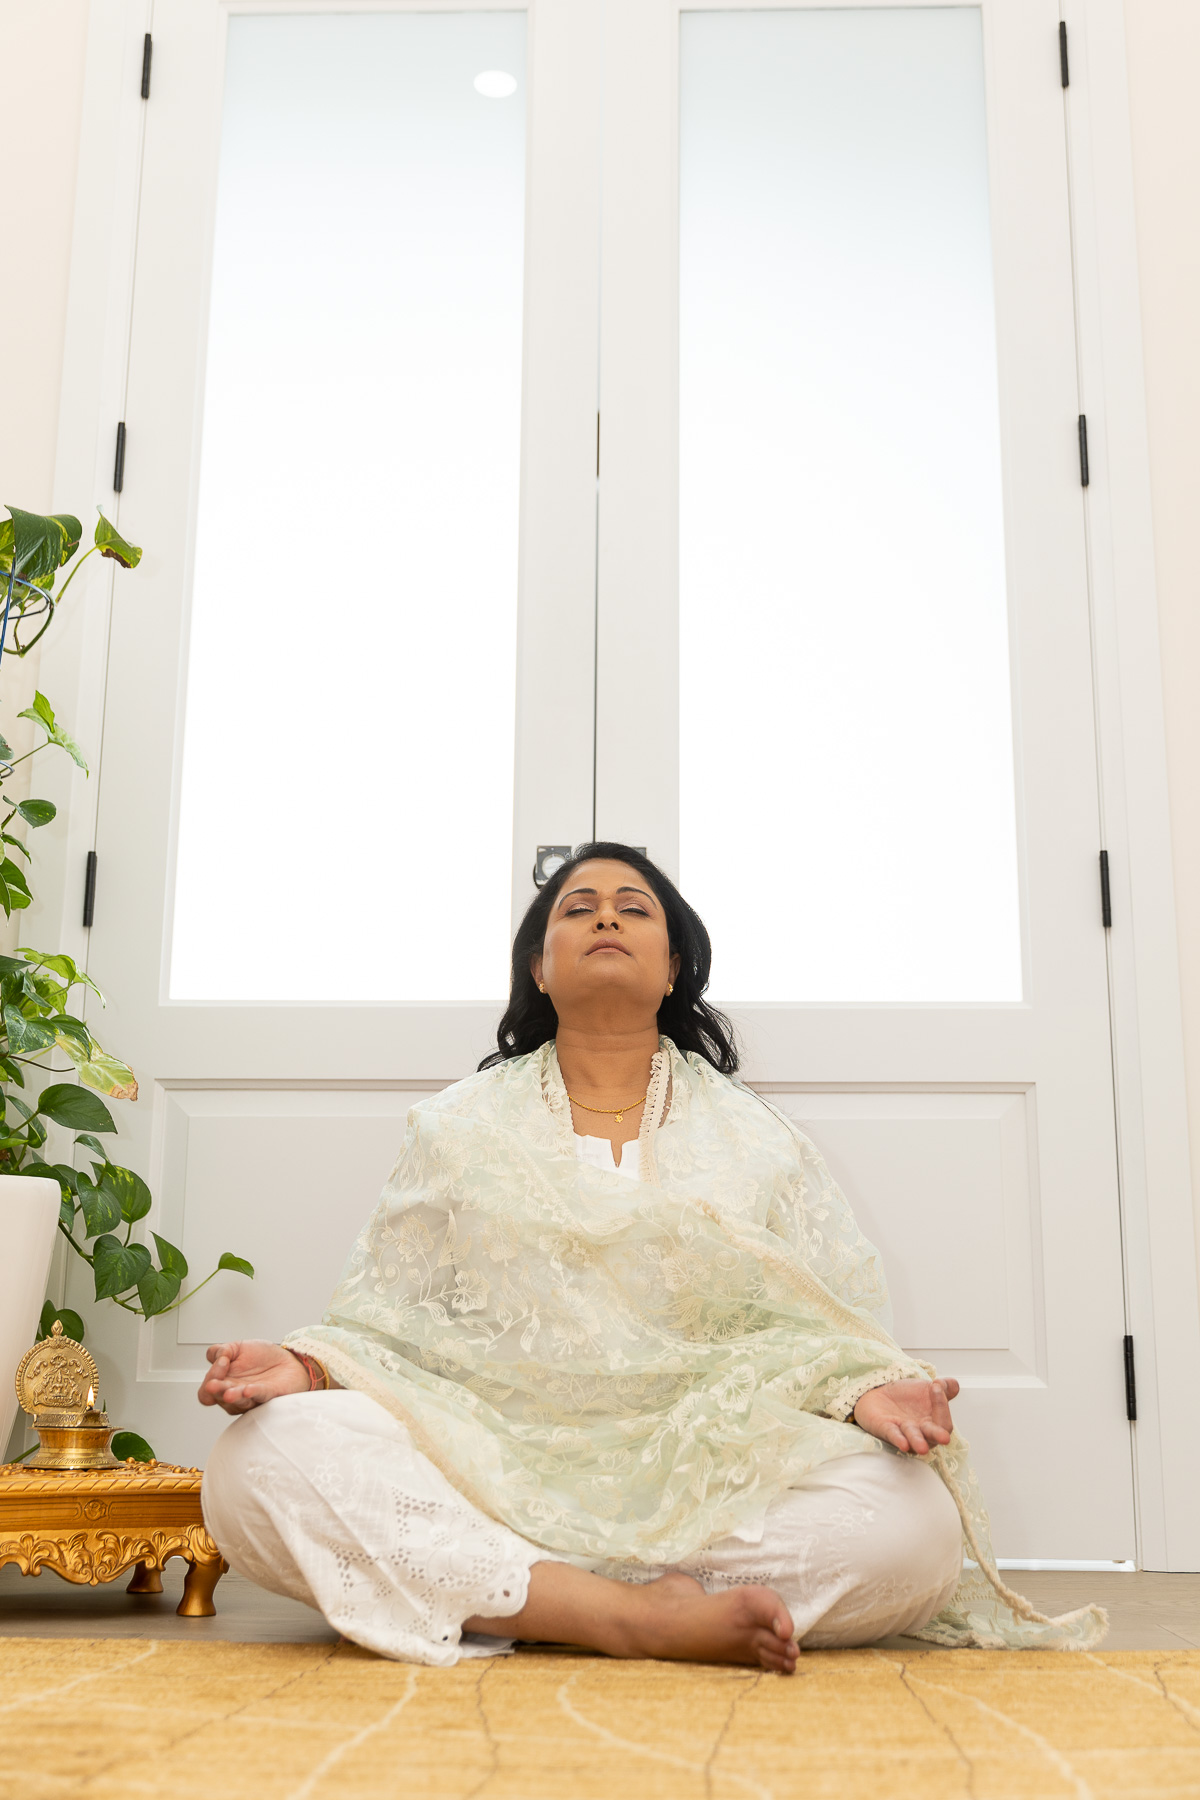 Kalinie meditating with her legs crossed, looking up towards the ceiling. She is in light coloured Indian clothing on a yellow mat. Behind her is a door with windows letting in bright light